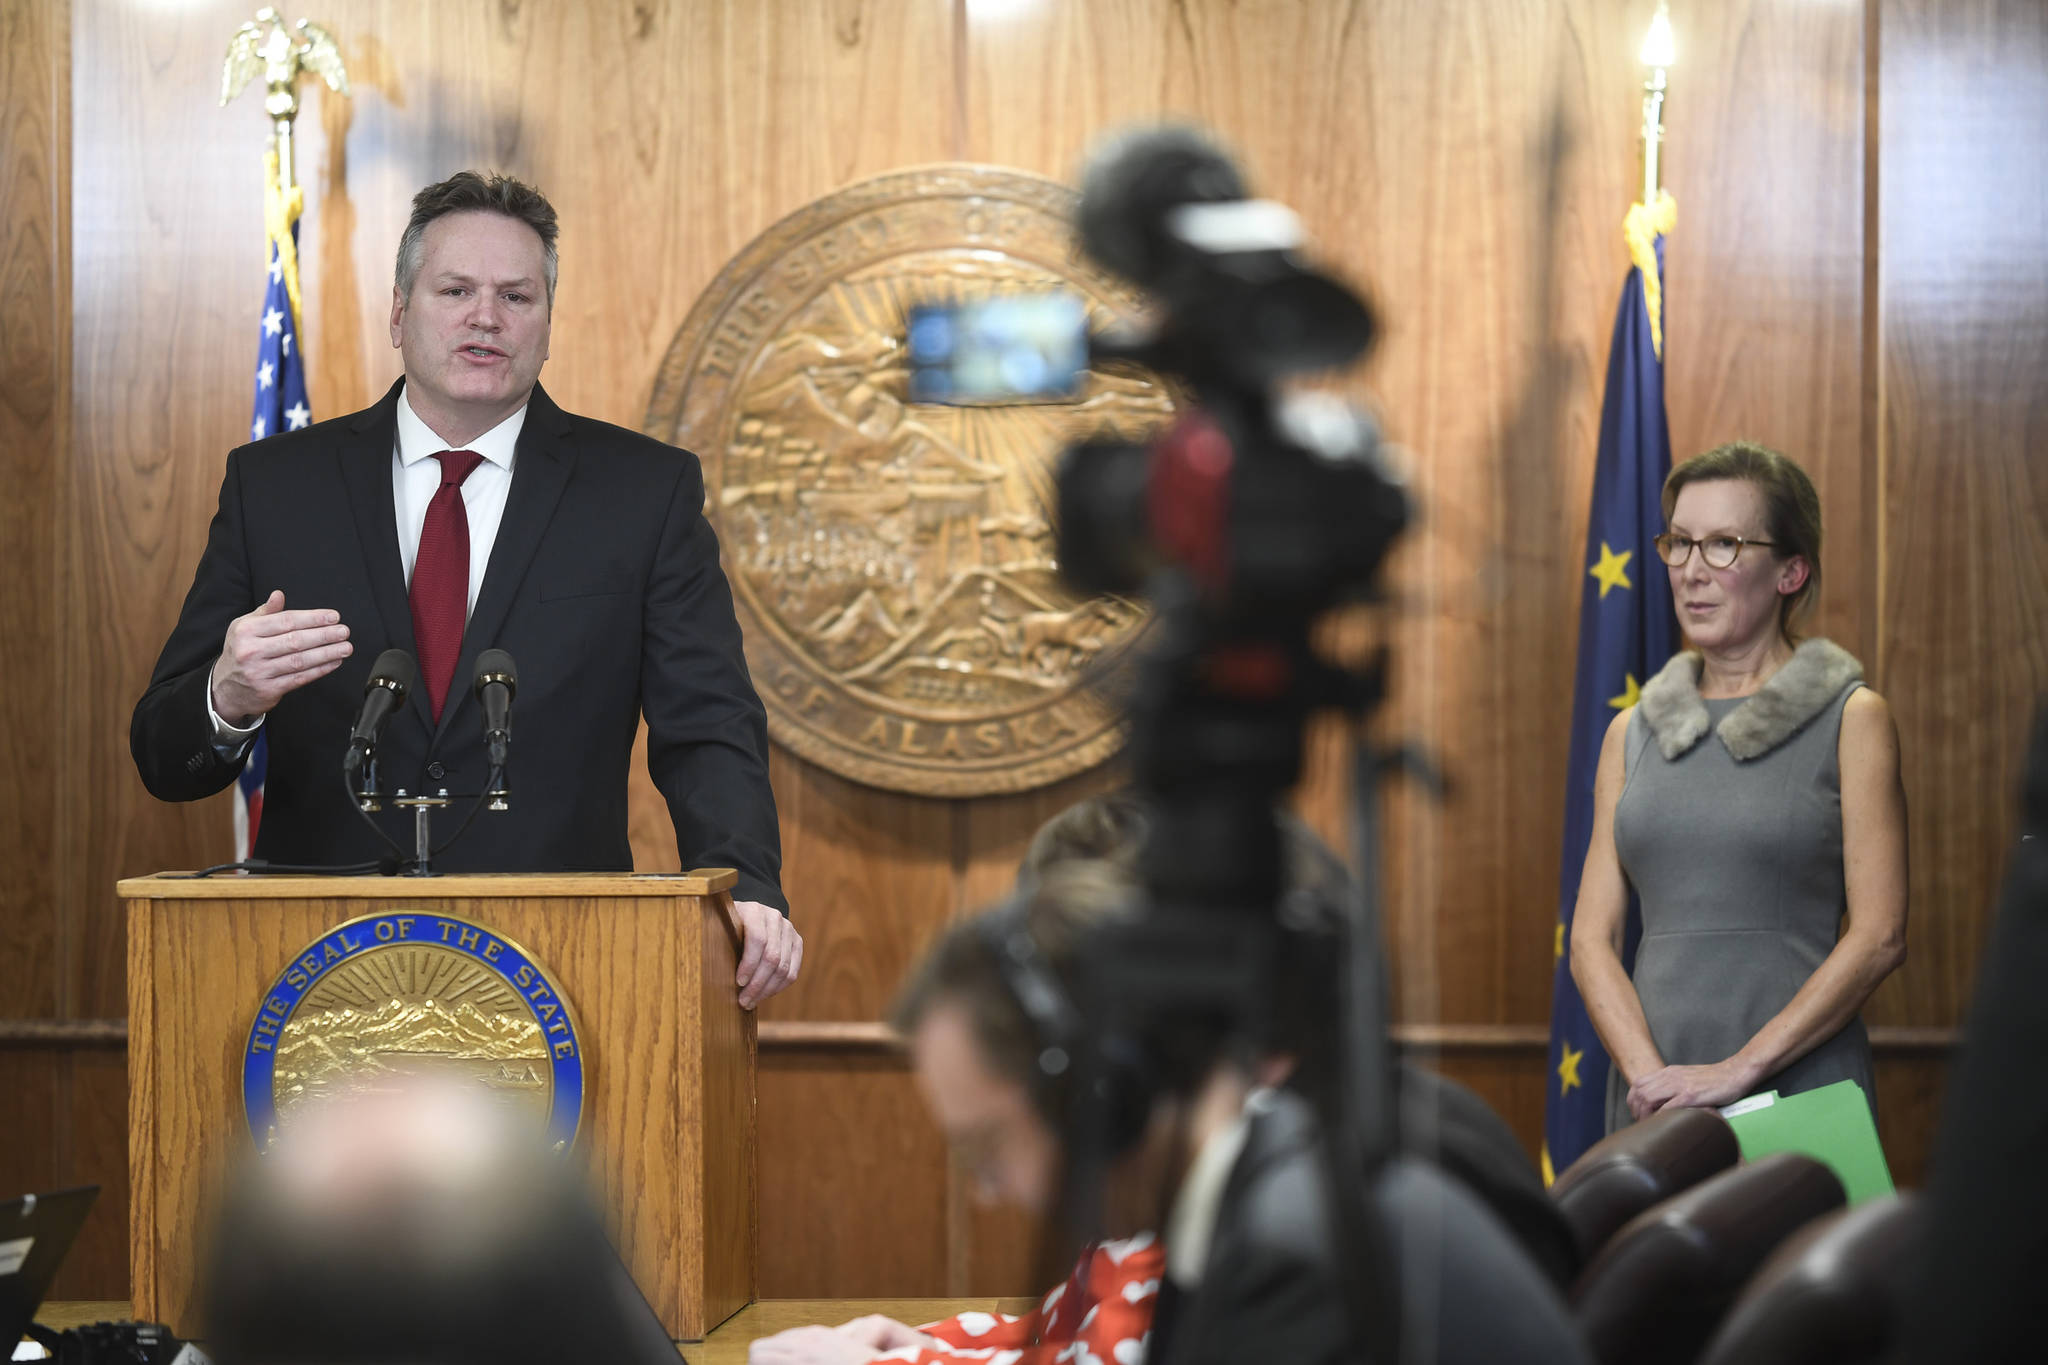 Dunleavy budget proposal proposes to eliminate hundreds of jobs